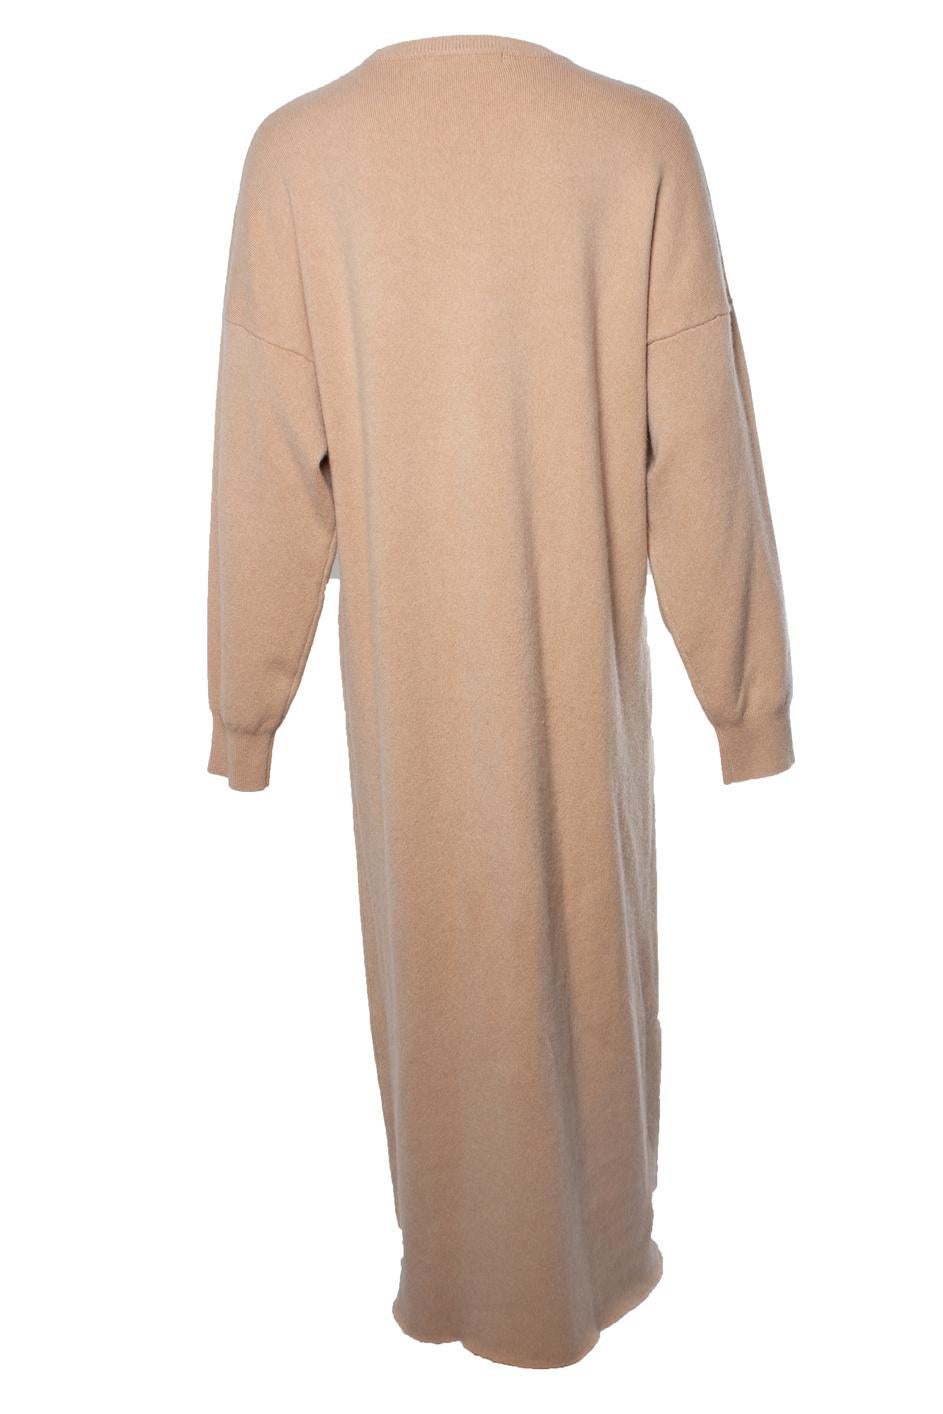 extreme cashmere, maxi dress in camel. The item is new - unworn.

• CONDITION: new - unworn

• SIZE: one size

• MEASUREMENTS: length 127 cm, width 56 cm, waist 56 cm, shoulder width 60 cm, sleeve length 54 cm

• MATERIAL: cashmere

• CARE: hand